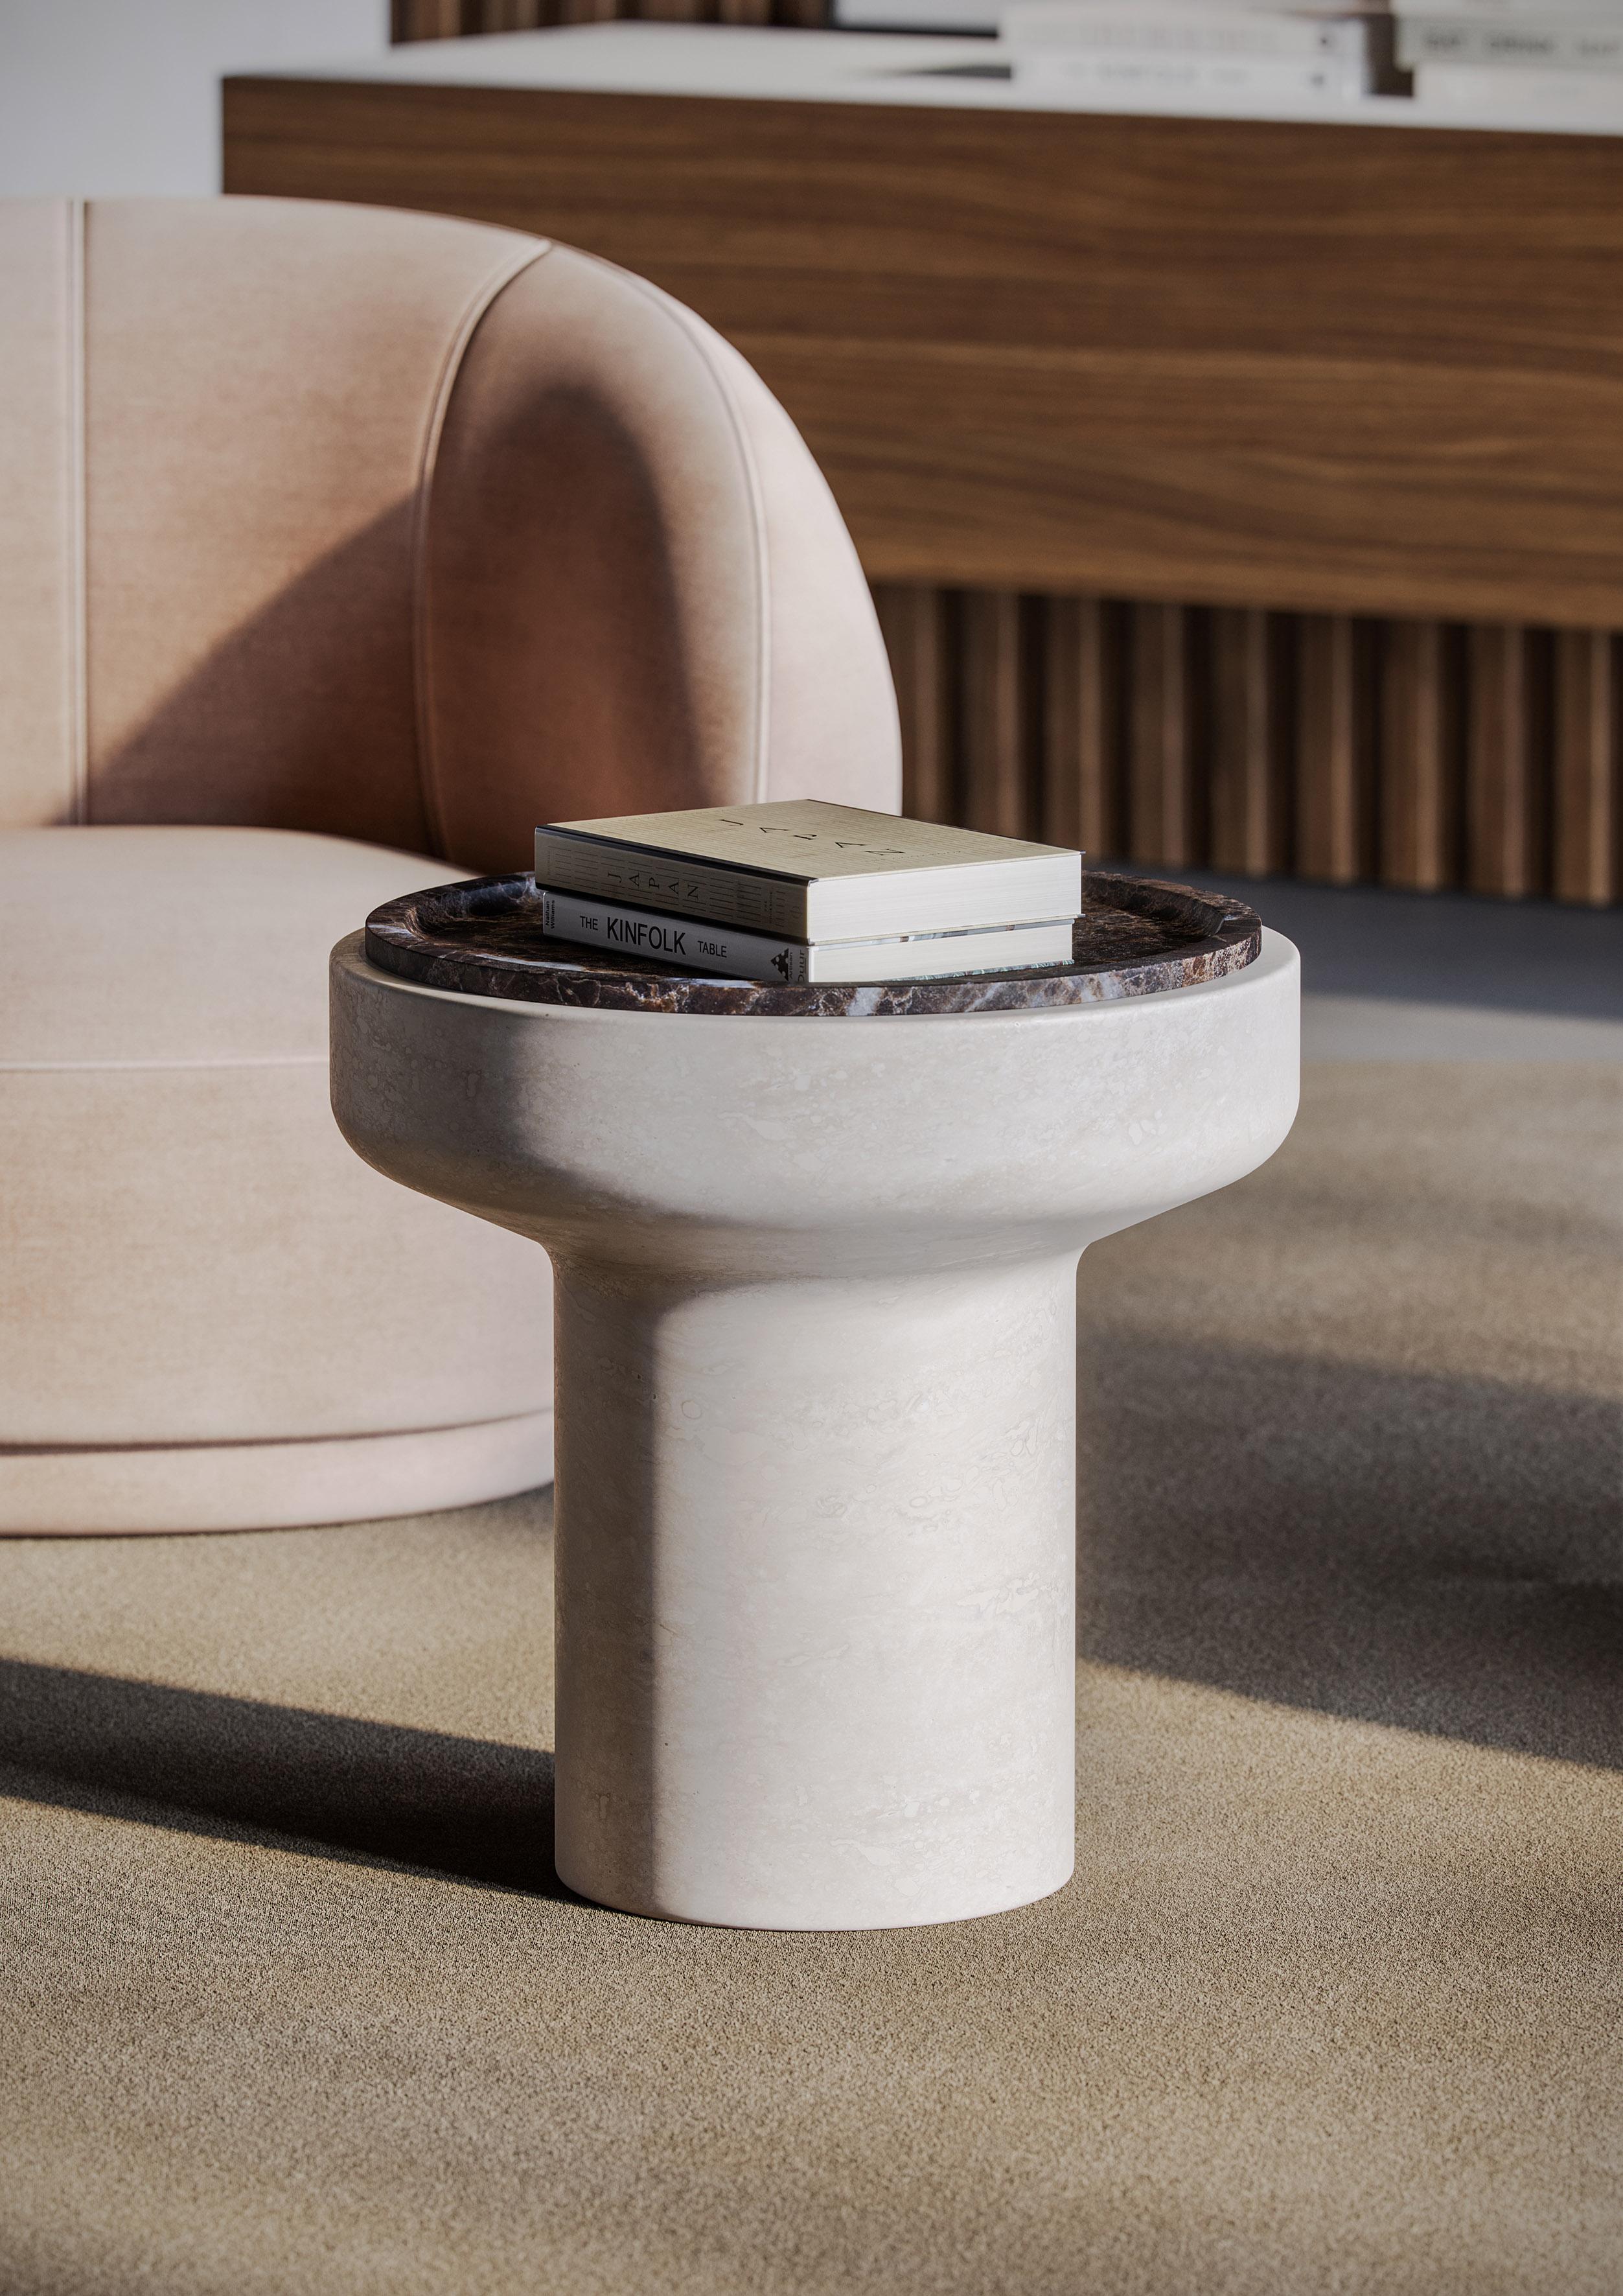 Side Table in Travertine Navona and Emperador dark.
Size: 50×50 cm. - 19,6x19,6 in. smooth finishing. 
Commercial name: Tivoli Side Table in marble, Tivoli Collection by the Spanish designer Ivan Colominas. Made in Italy, hand finished.

Tivoli, a